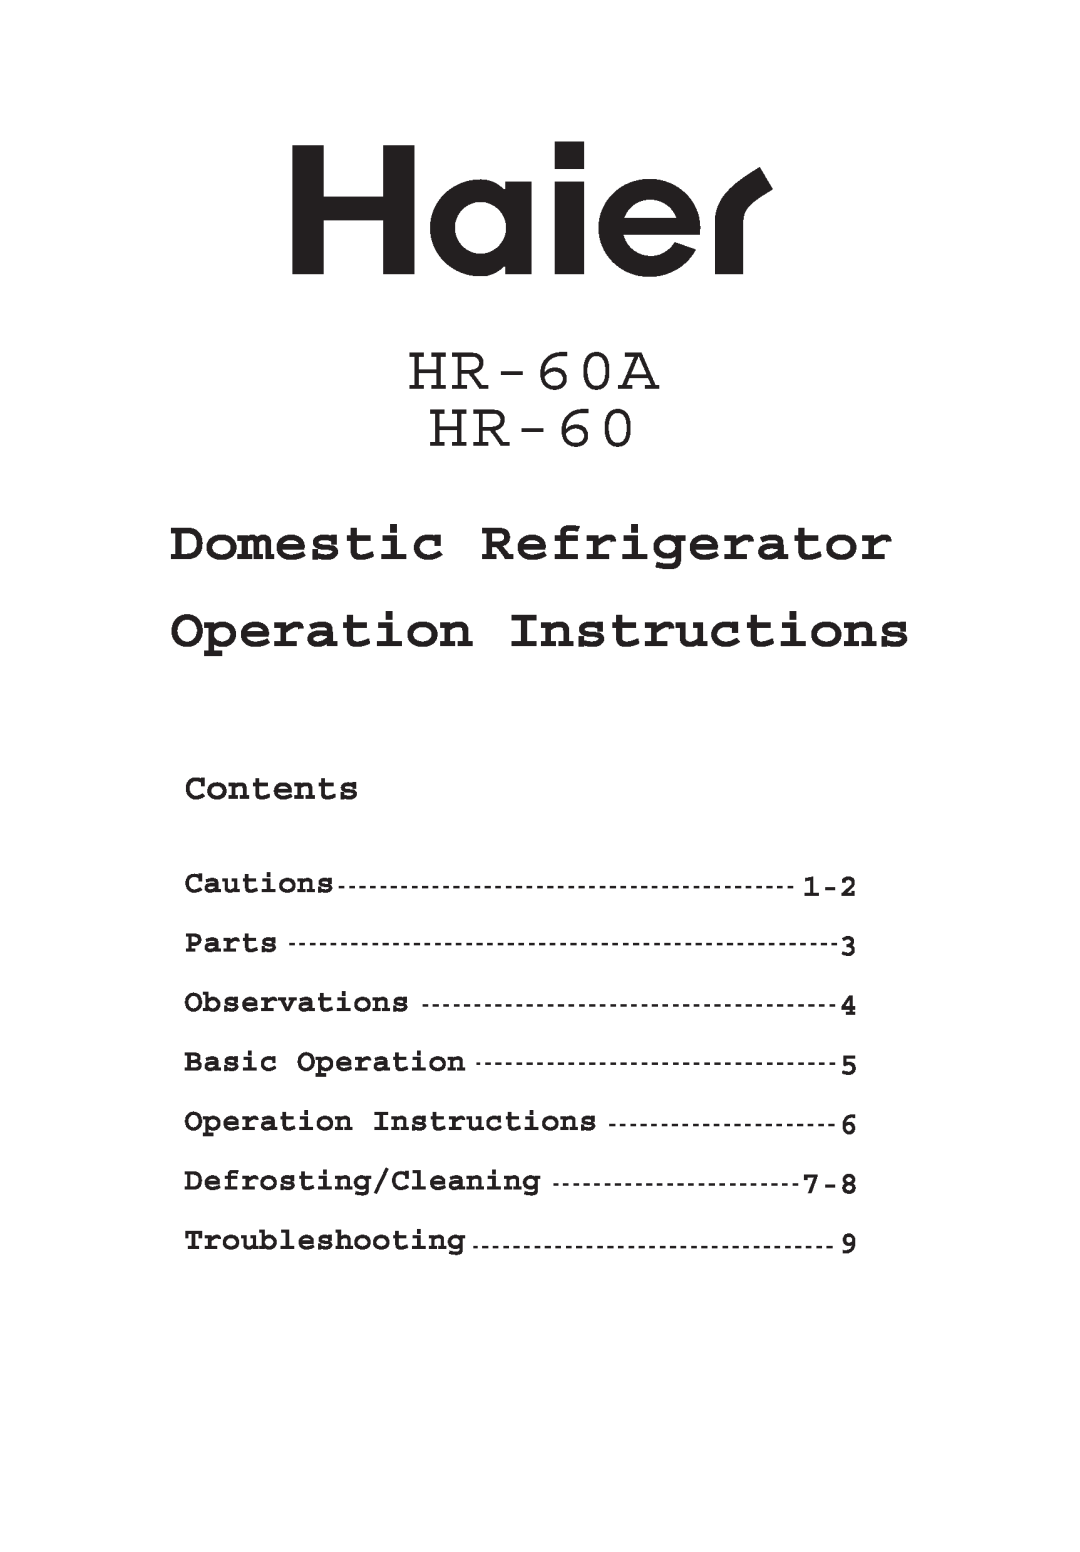 Haier manual HR-60A HR-60, Domestic Refrigerator Operation Instructions, Contents, Troubleshooting, 1-2 3 4 5 6 7-8 